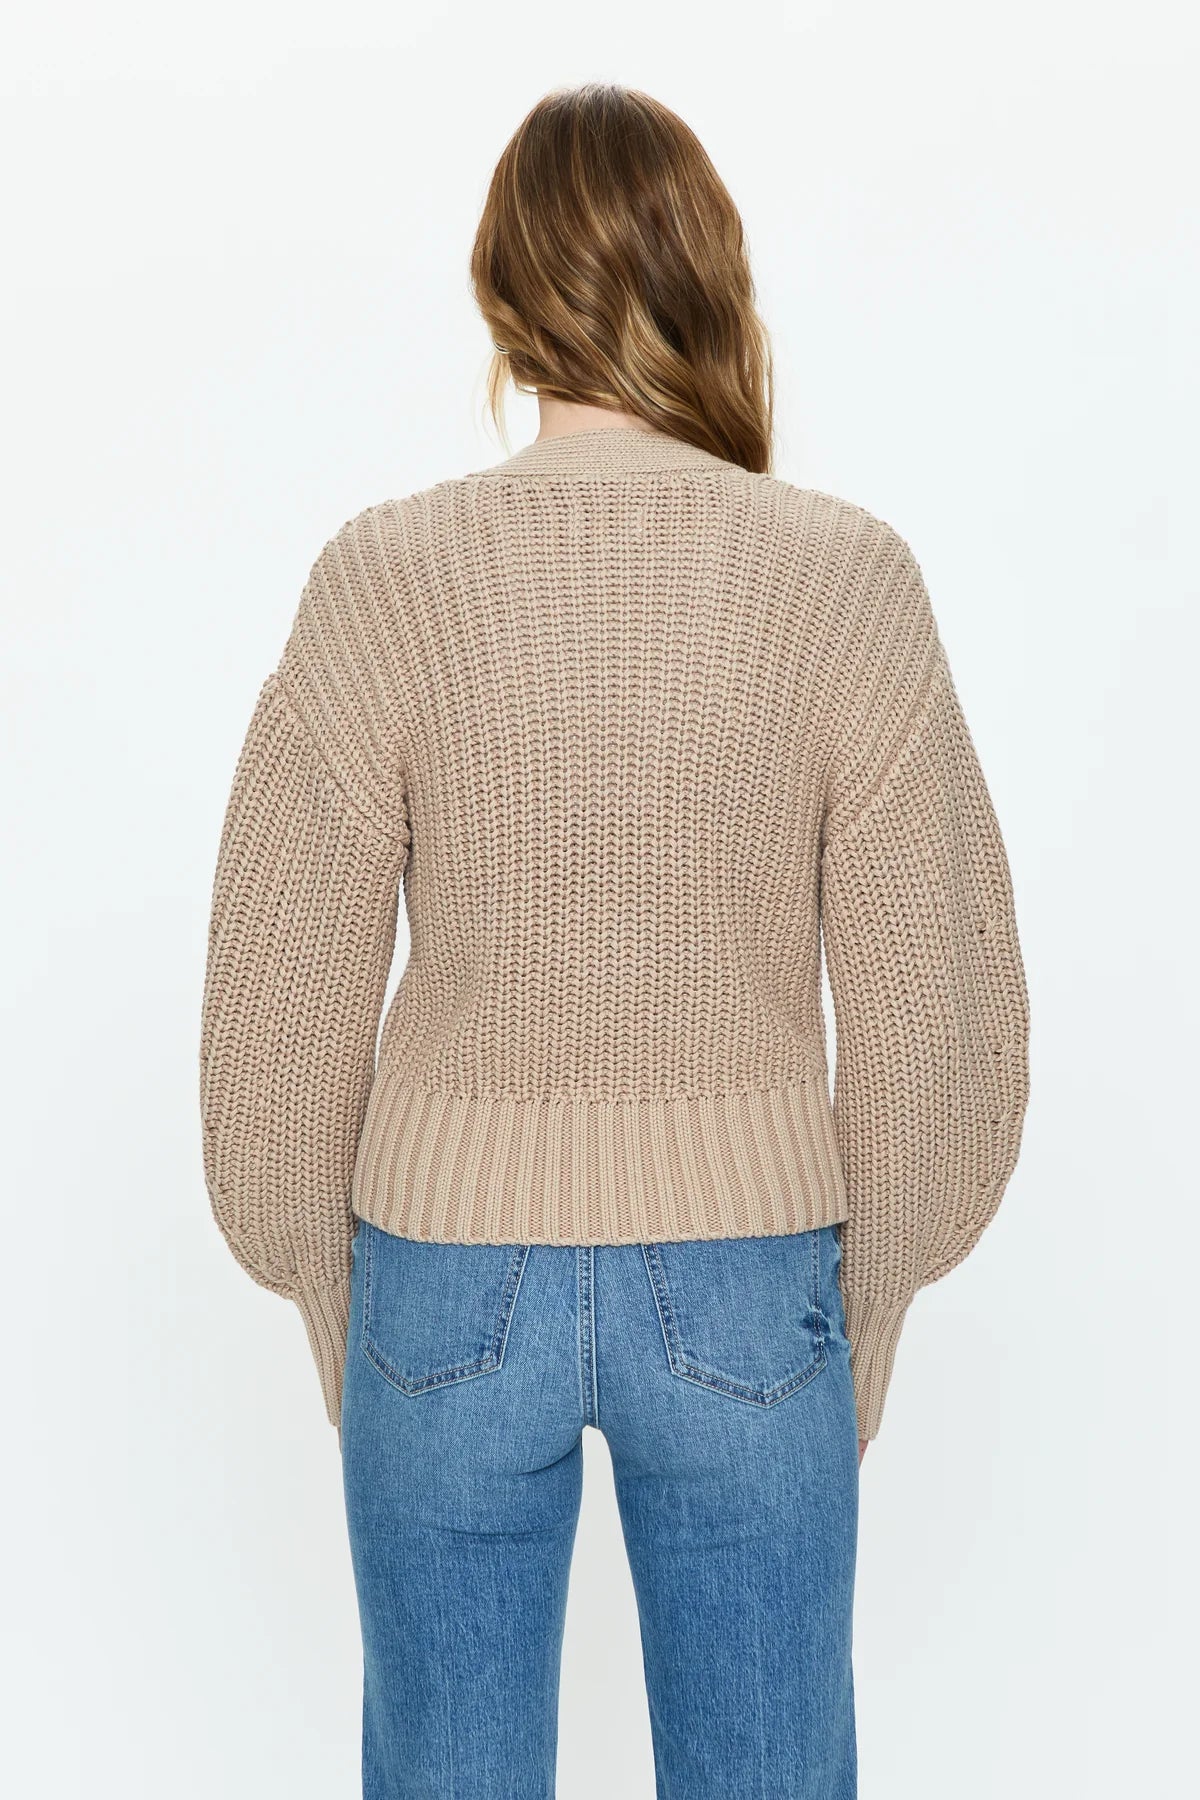 Mallory Cardigan in Sable *FINAL SALE*